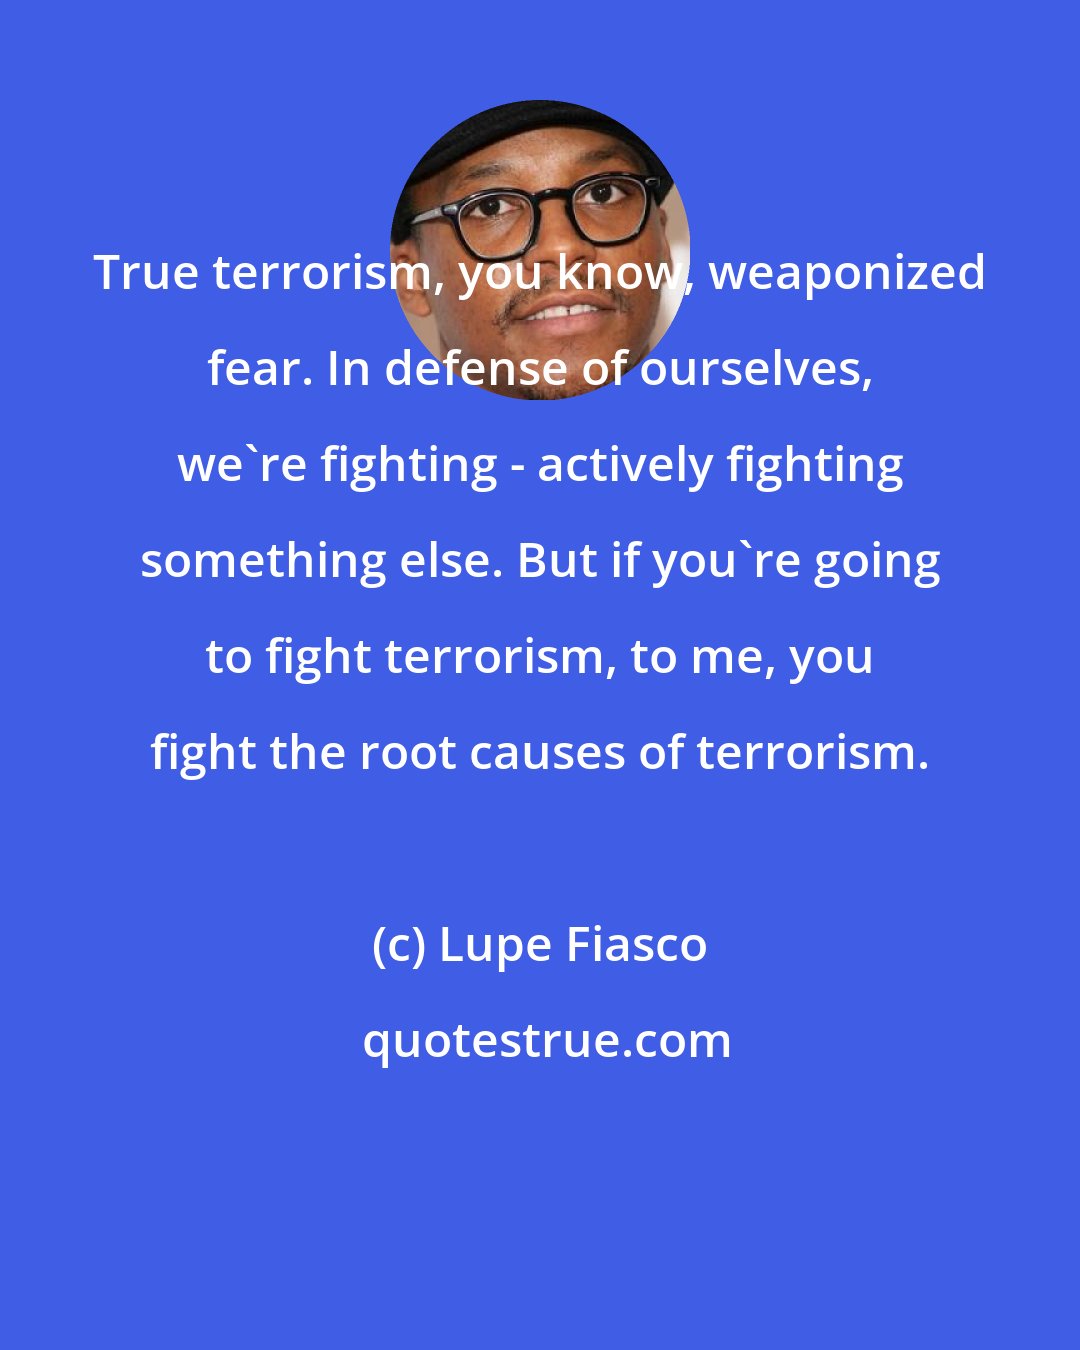 Lupe Fiasco: True terrorism, you know, weaponized fear. In defense of ourselves, we're fighting - actively fighting something else. But if you're going to fight terrorism, to me, you fight the root causes of terrorism.